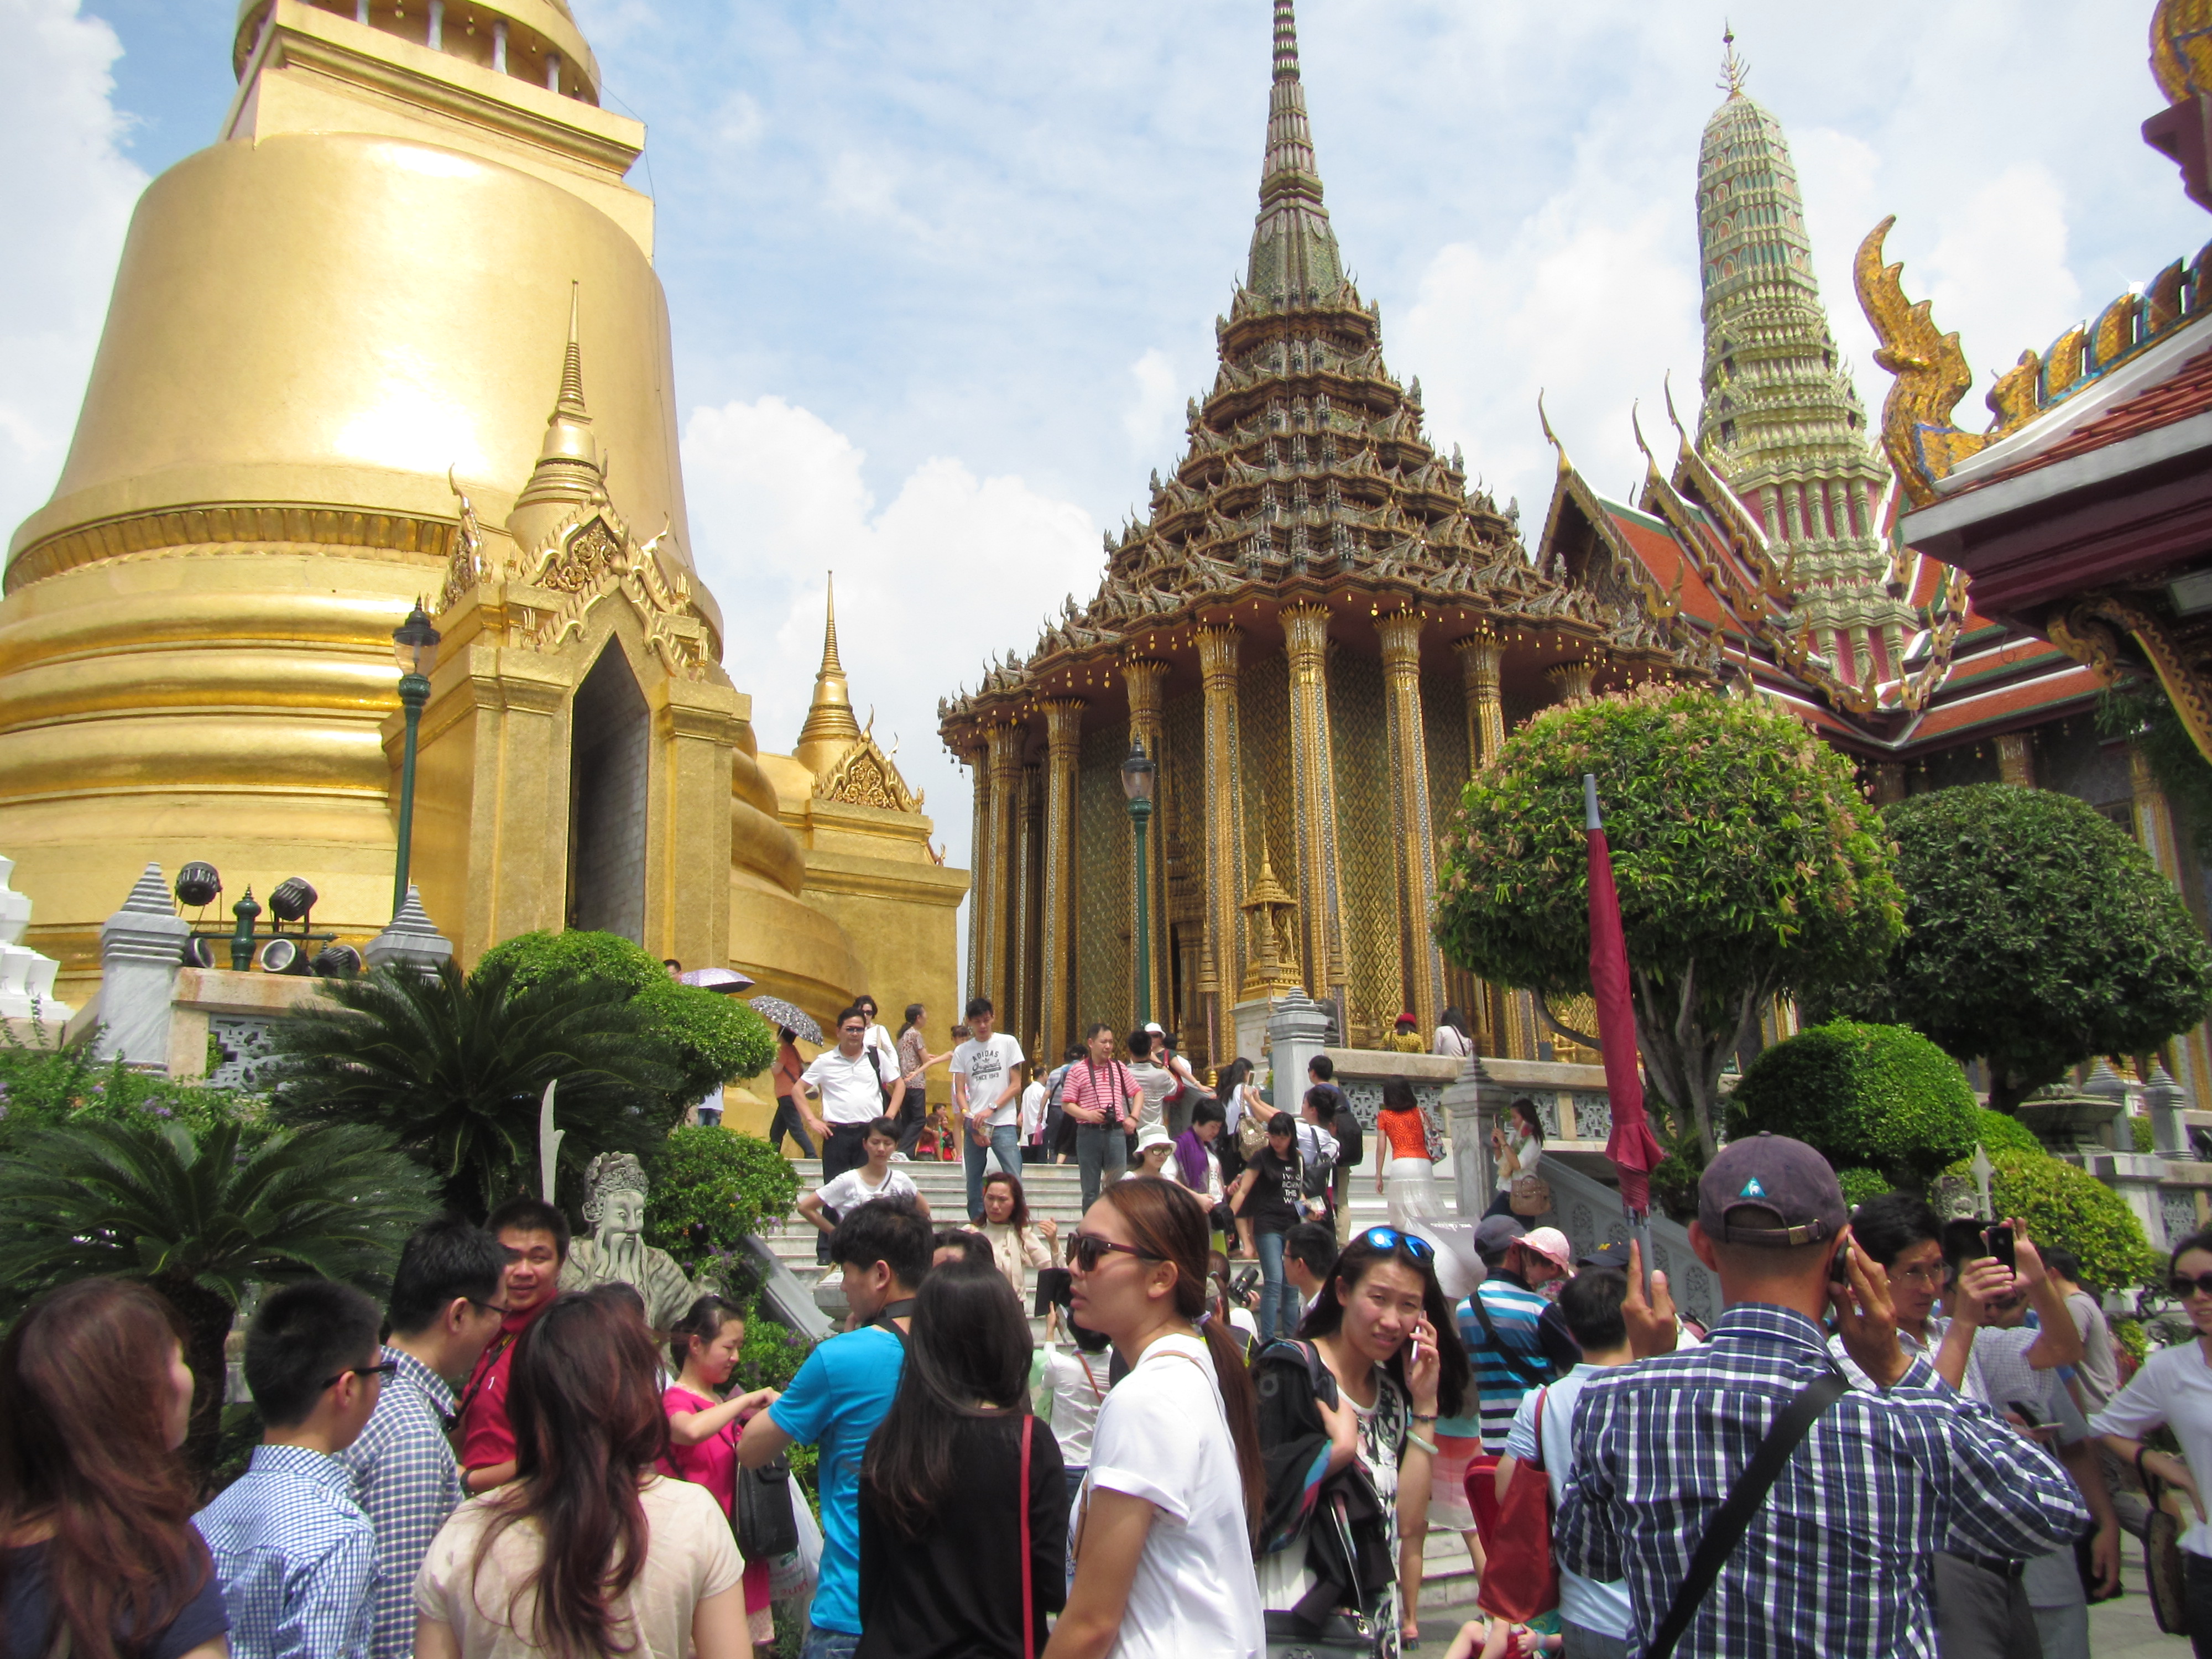 The crowds at The Grand Palace were a little crazy!  It was like being back in China!!